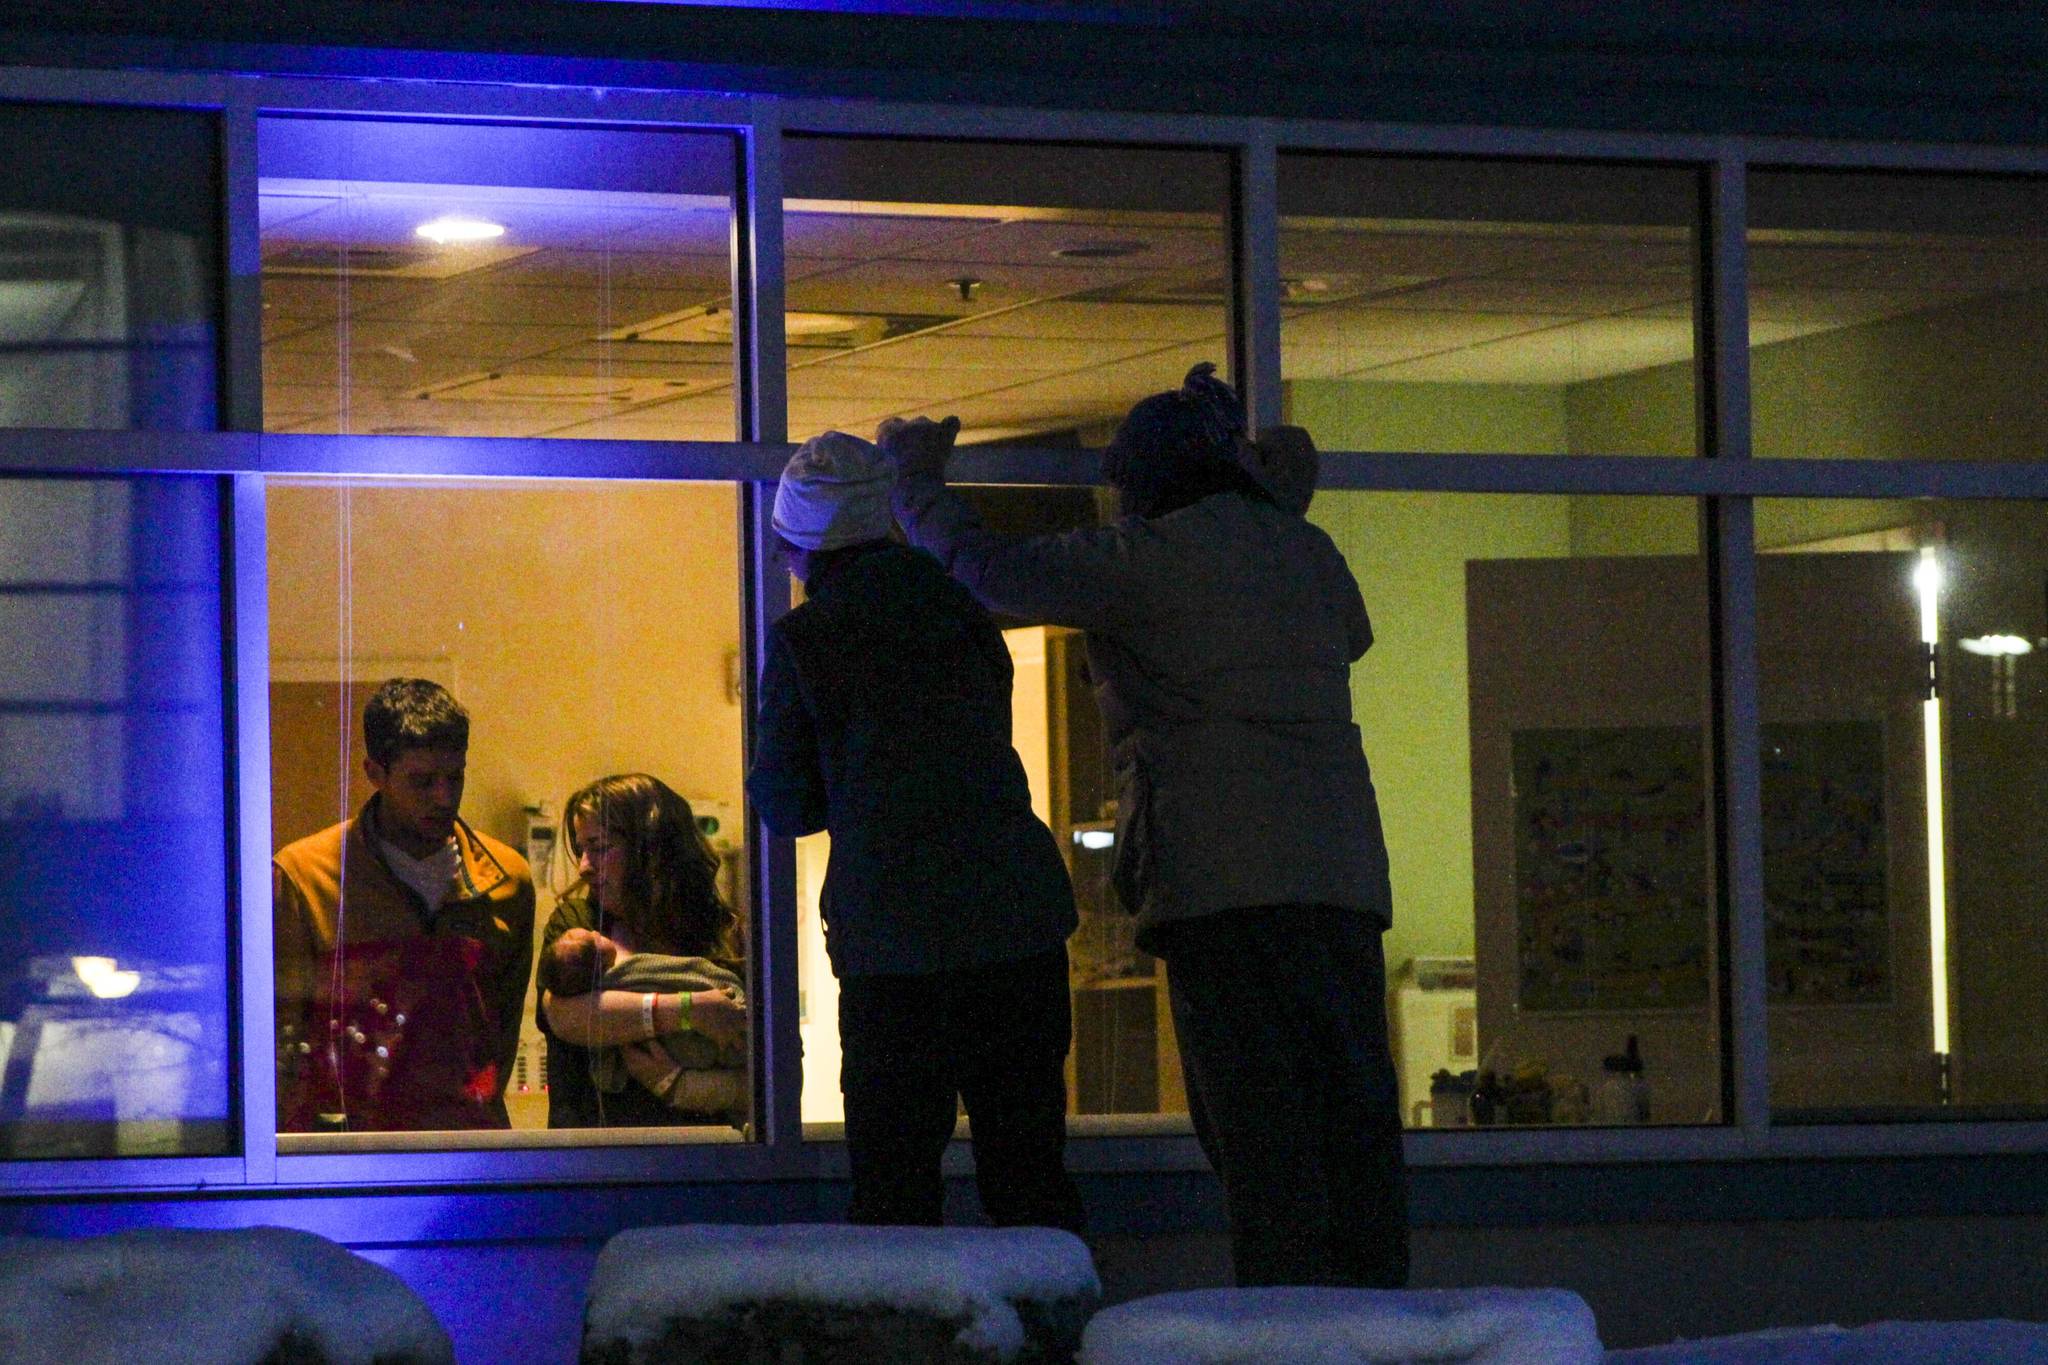 Michael S. Lockett / Juneau Empire
People gather to view a child through a window at Bartlett Regional Hospital on Dec. 15. Juneau and Alaska’s overall population is shrinking due to high numbers of emigrating boomers and low numbers of childbirths.